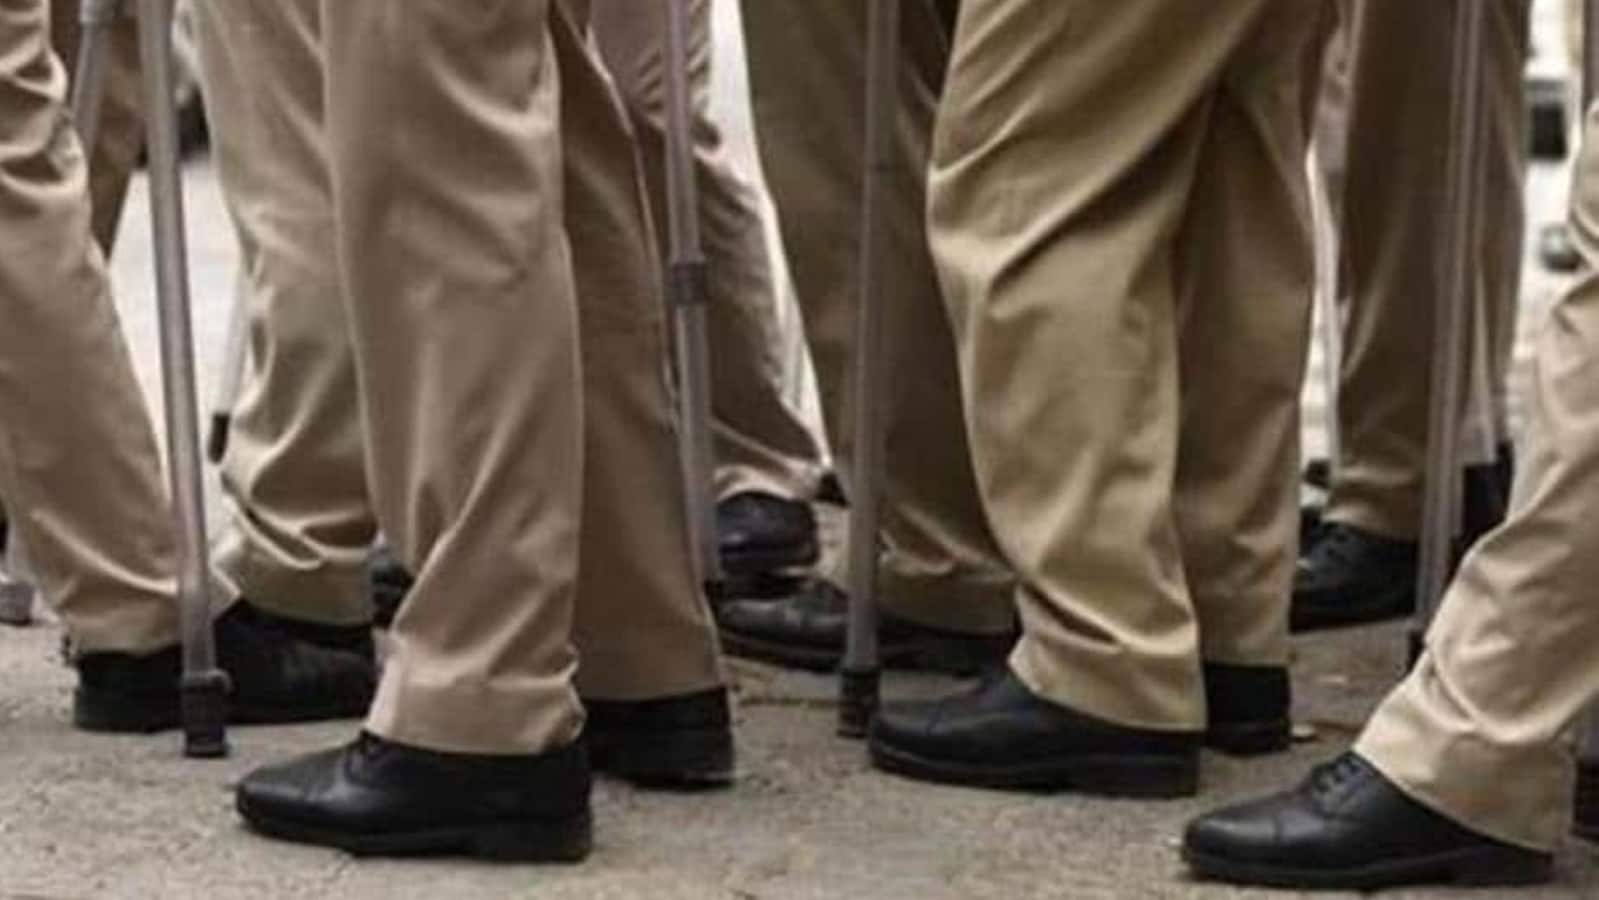 Man dies after police 'raid' at Gorakhpur hotel, 6 cops suspended | Latest News India - Hindustan Times